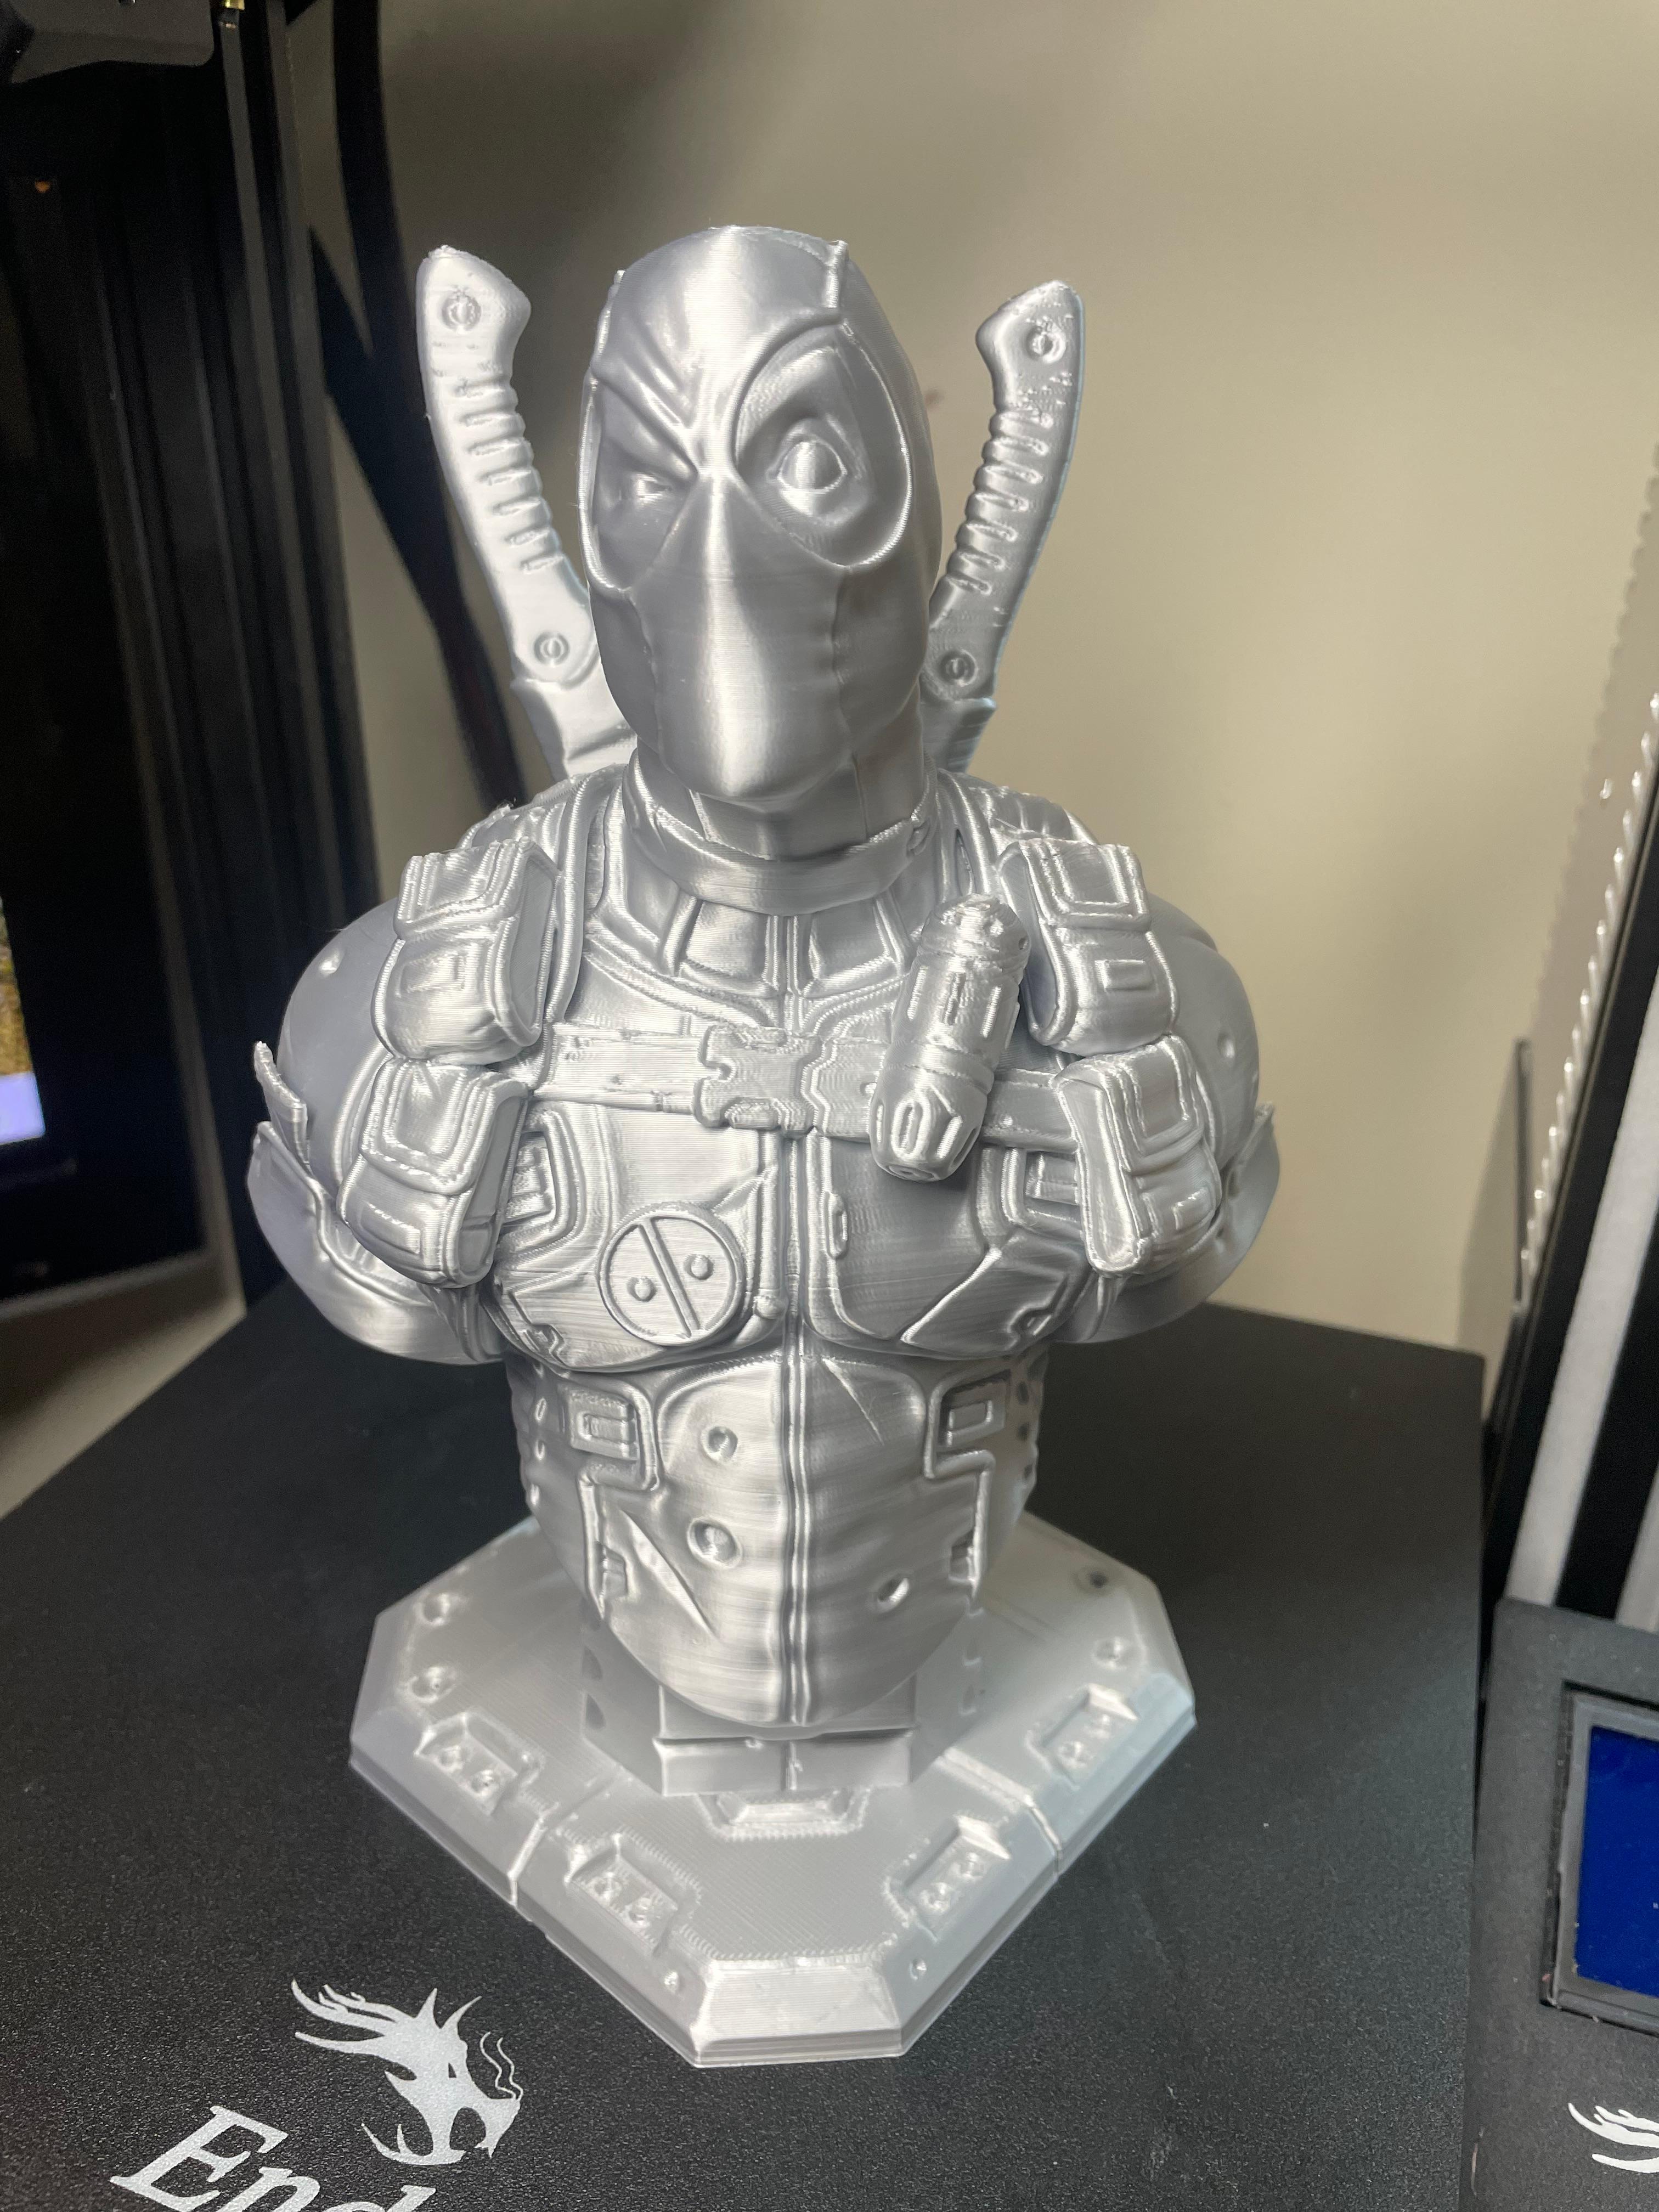 Deadpool bust (Remastered Supportless Edition) (fan art) - printed on an ender 3 neo
200mm high
silver pla at 210c
14 hour print - 3d model